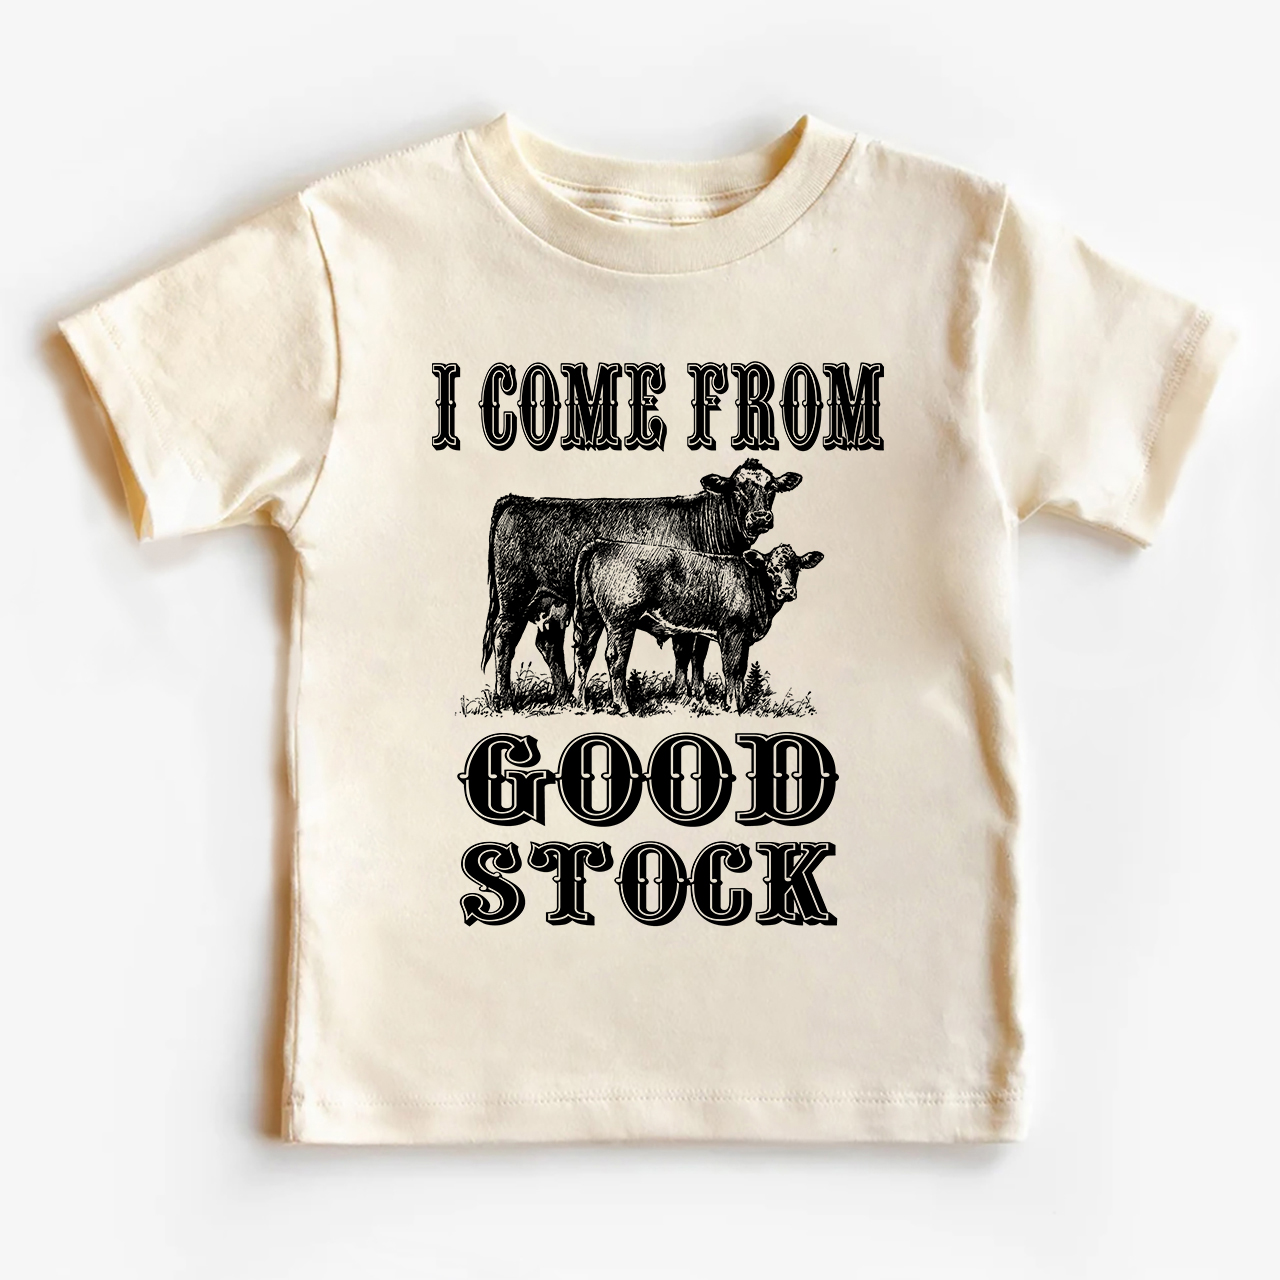  I Come From Good Stock Toddler Shirt